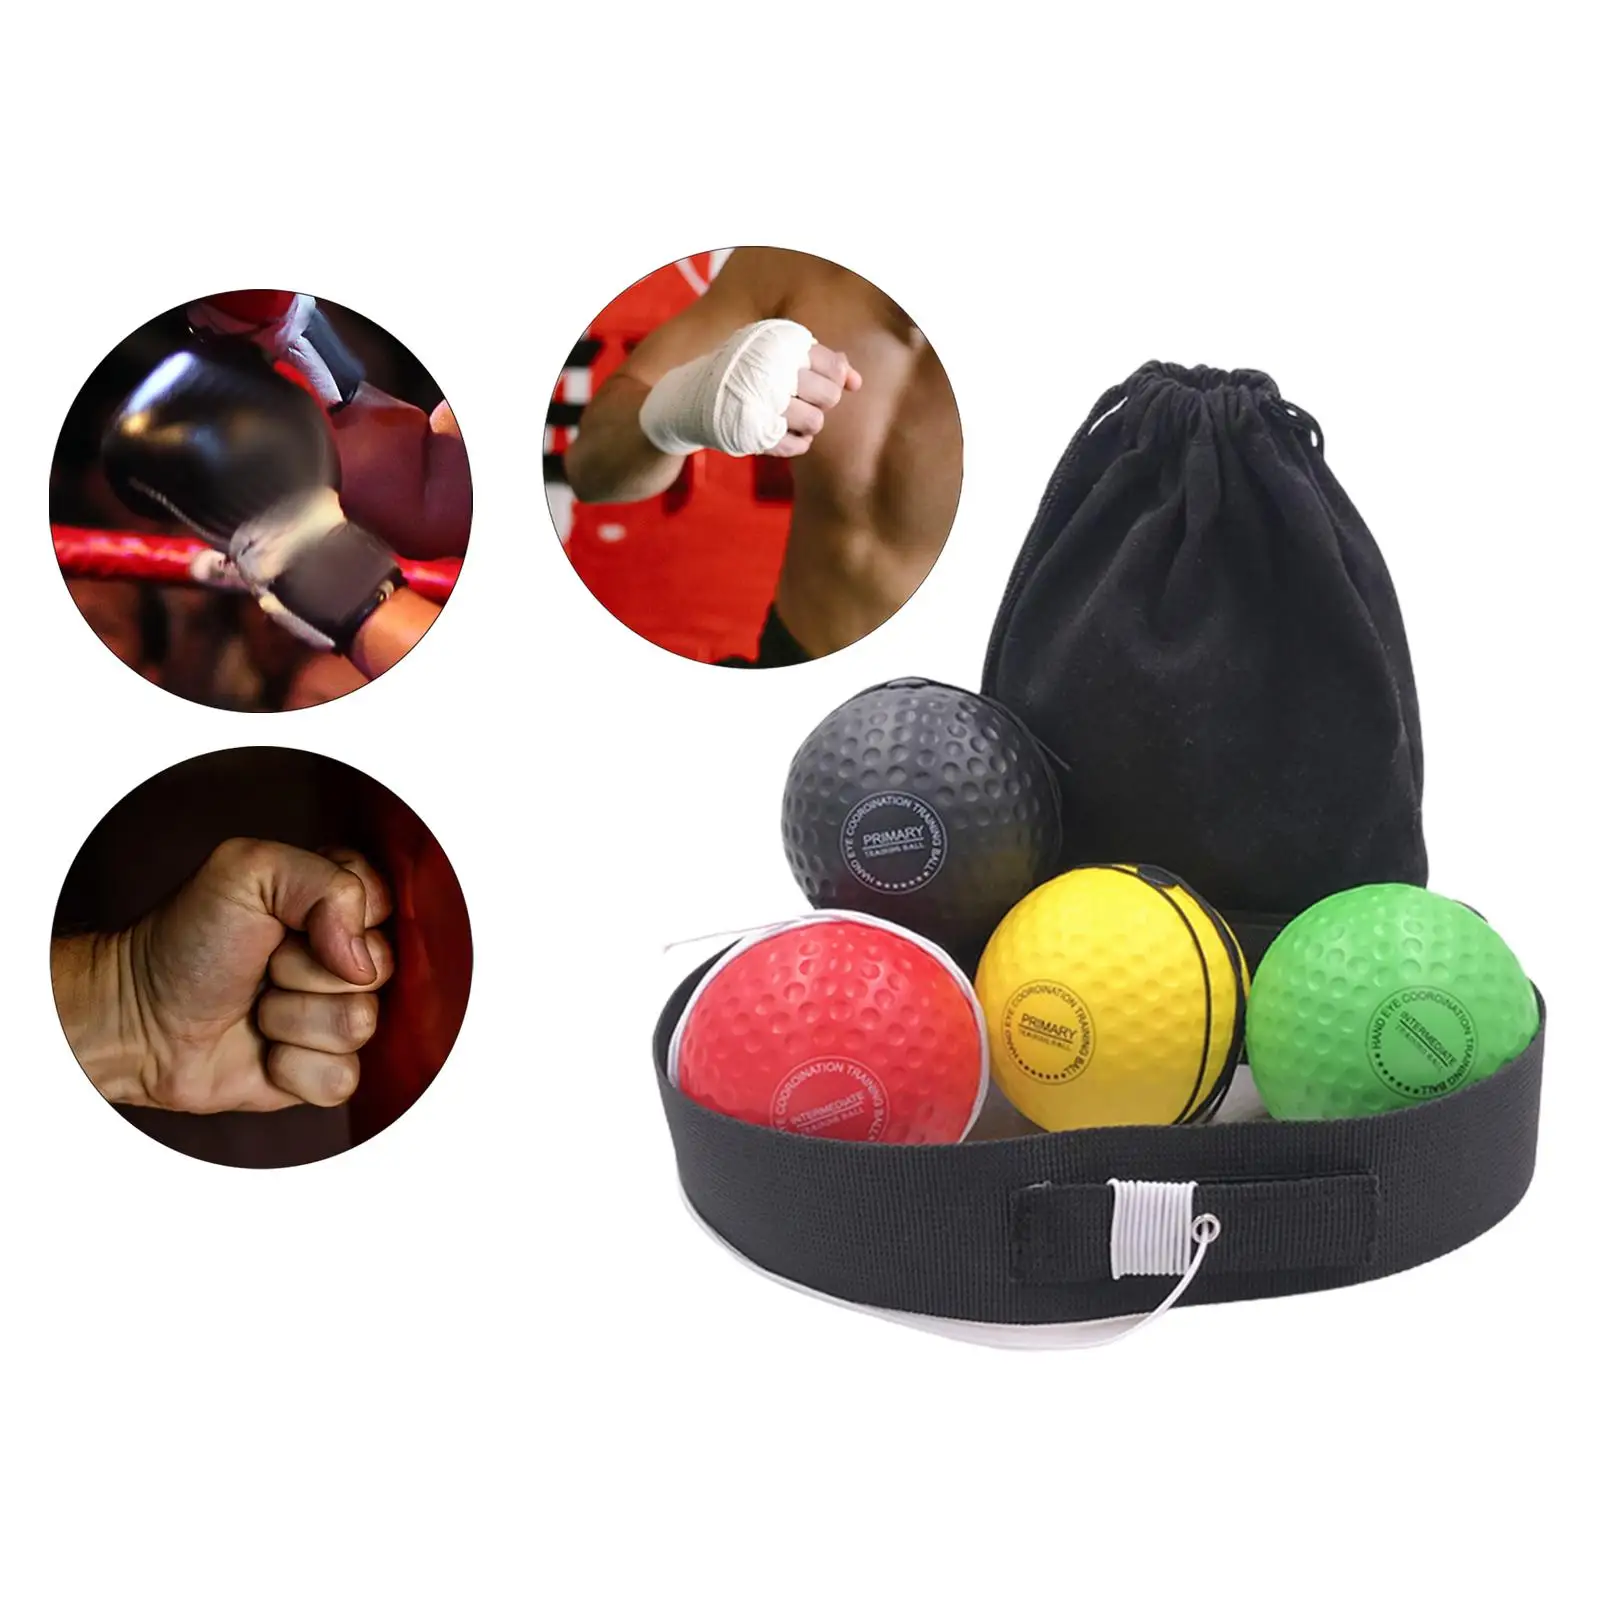 Boxing Reflex Ball Headband Reflex Punching Ball Hand Eye Coordination Training Adjustable for Workout Exercise Mma Home Gym